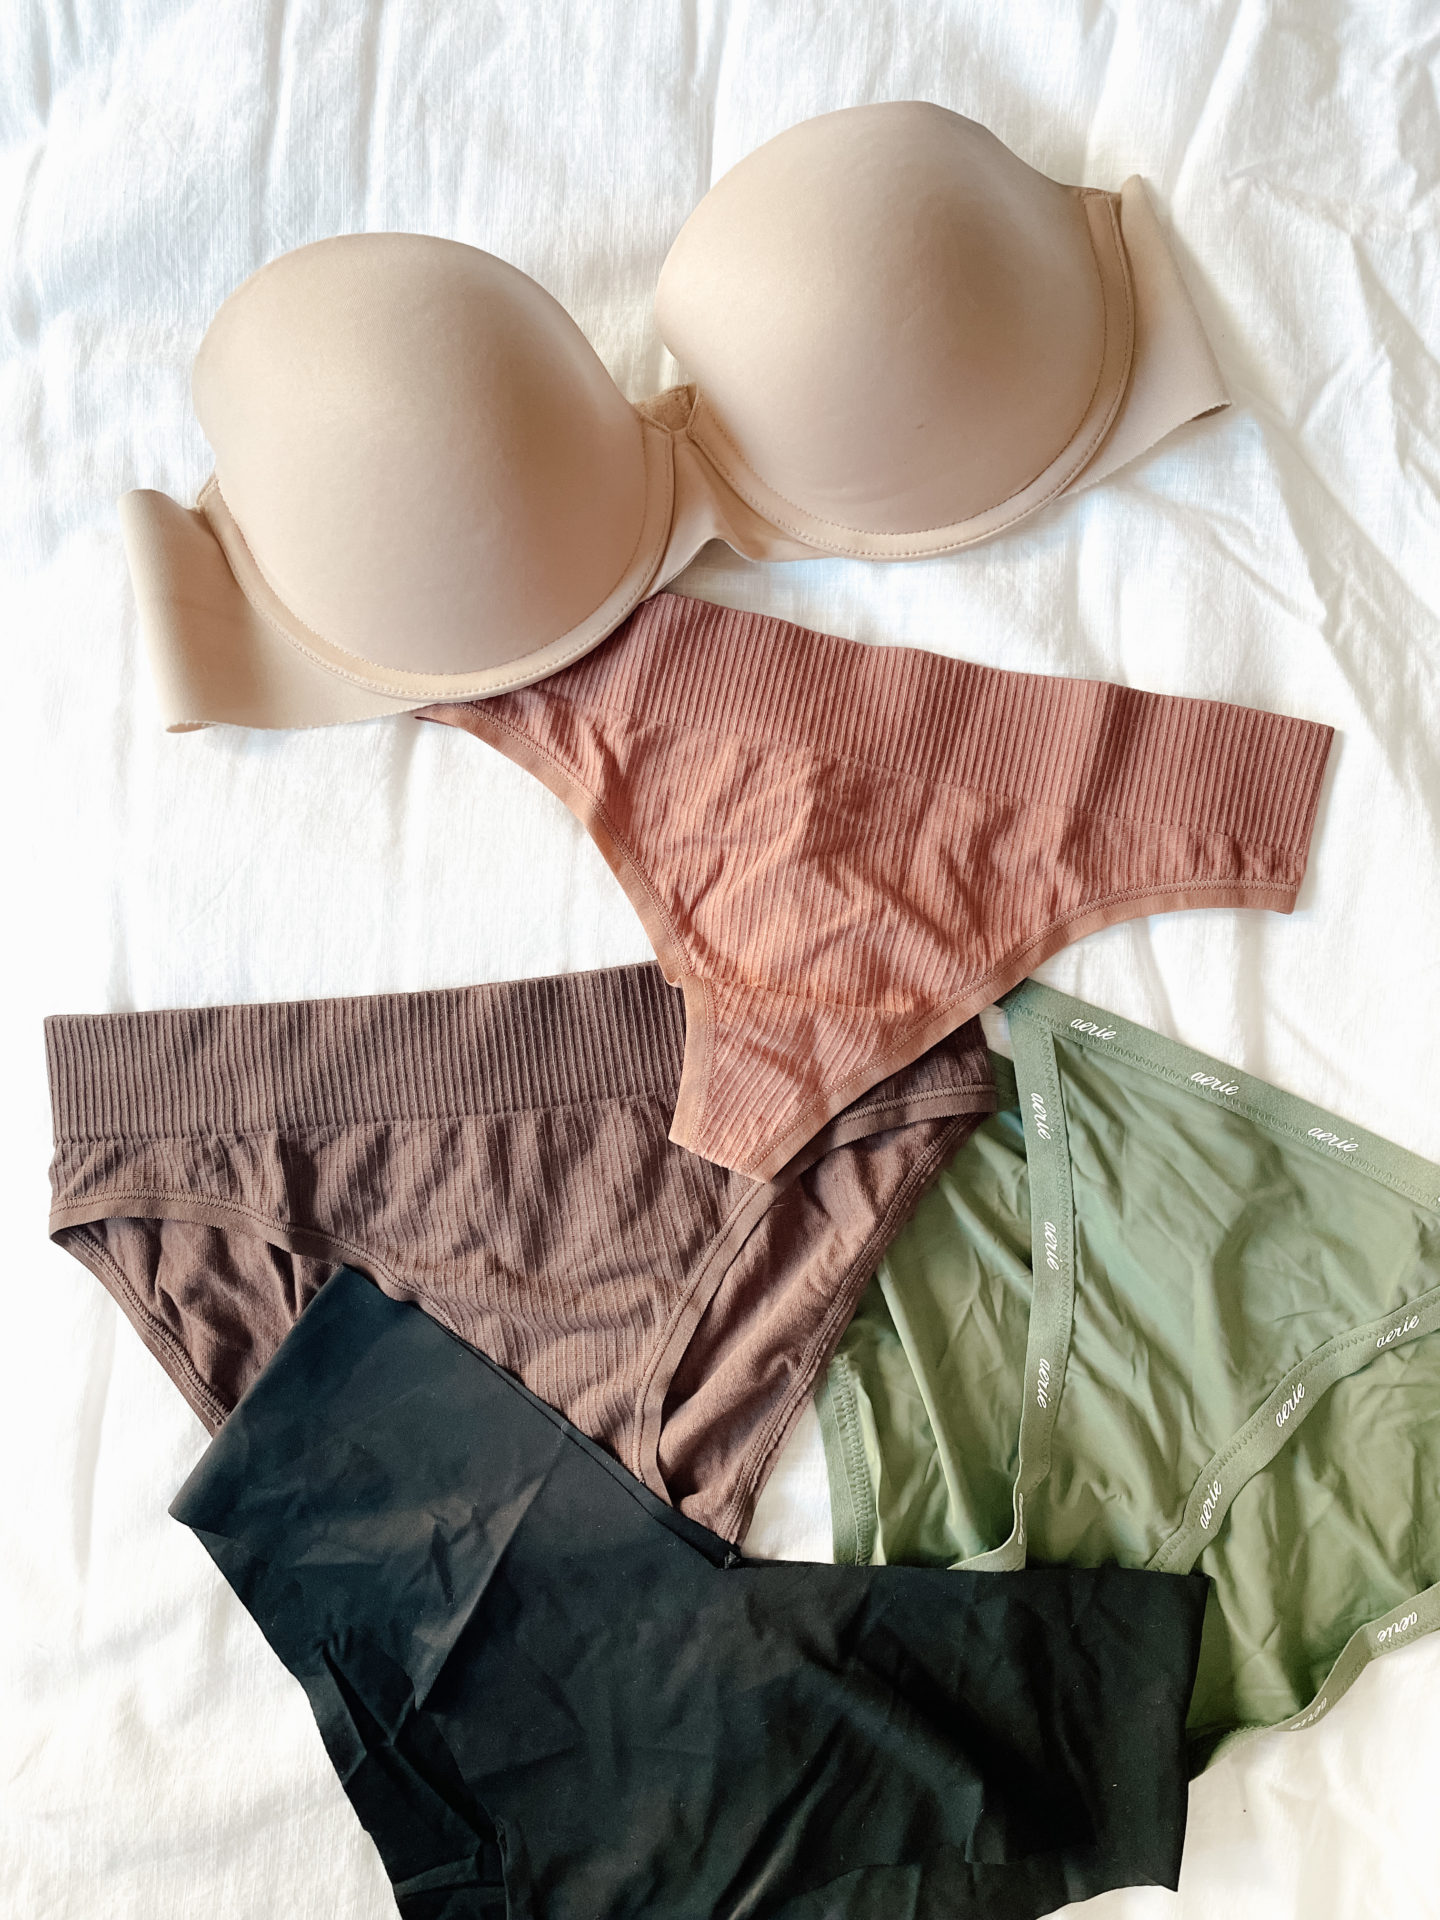 How are you getting sorted for Fall? New bra? New undies? Both? 😏